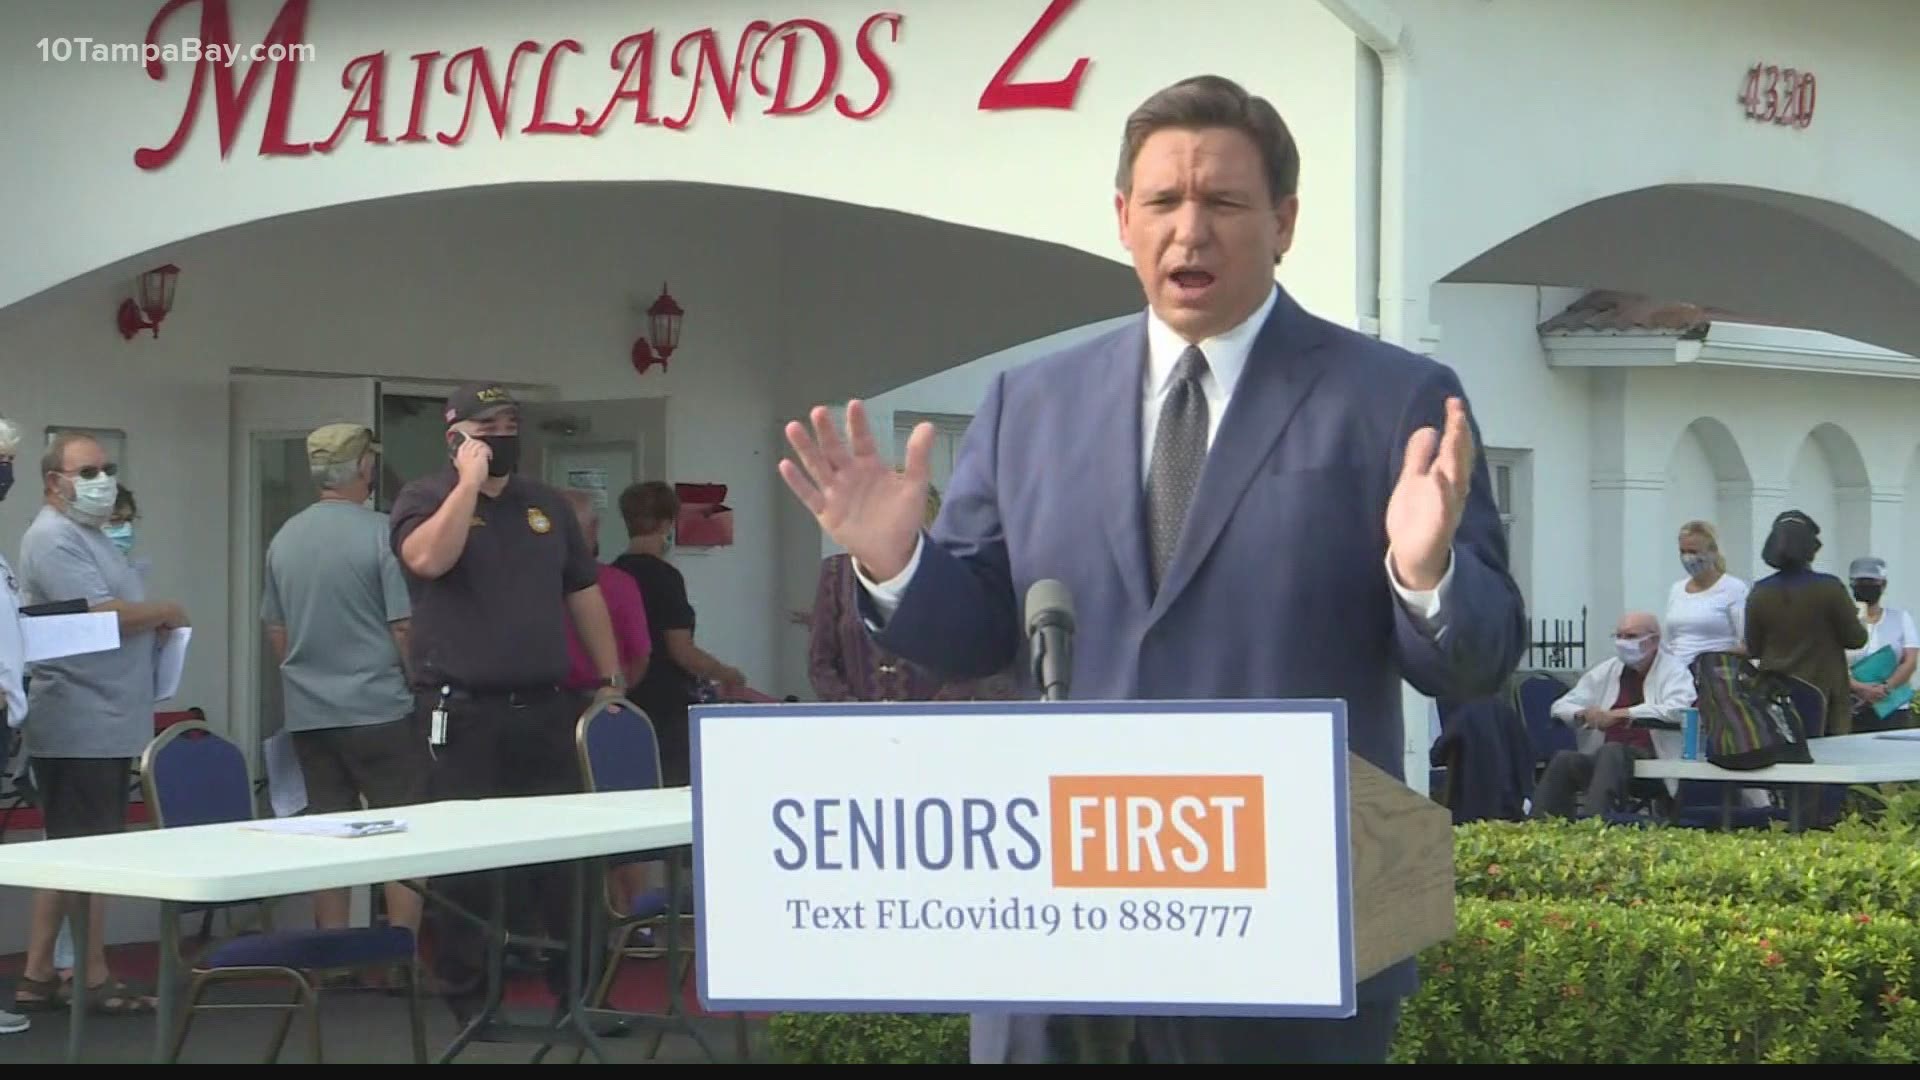 Gov. DeSantis announced a pop-up vaccination site in Pinellas Park after facing scrutiny in Manatee County for the Lakewood Ranch pop-up site.